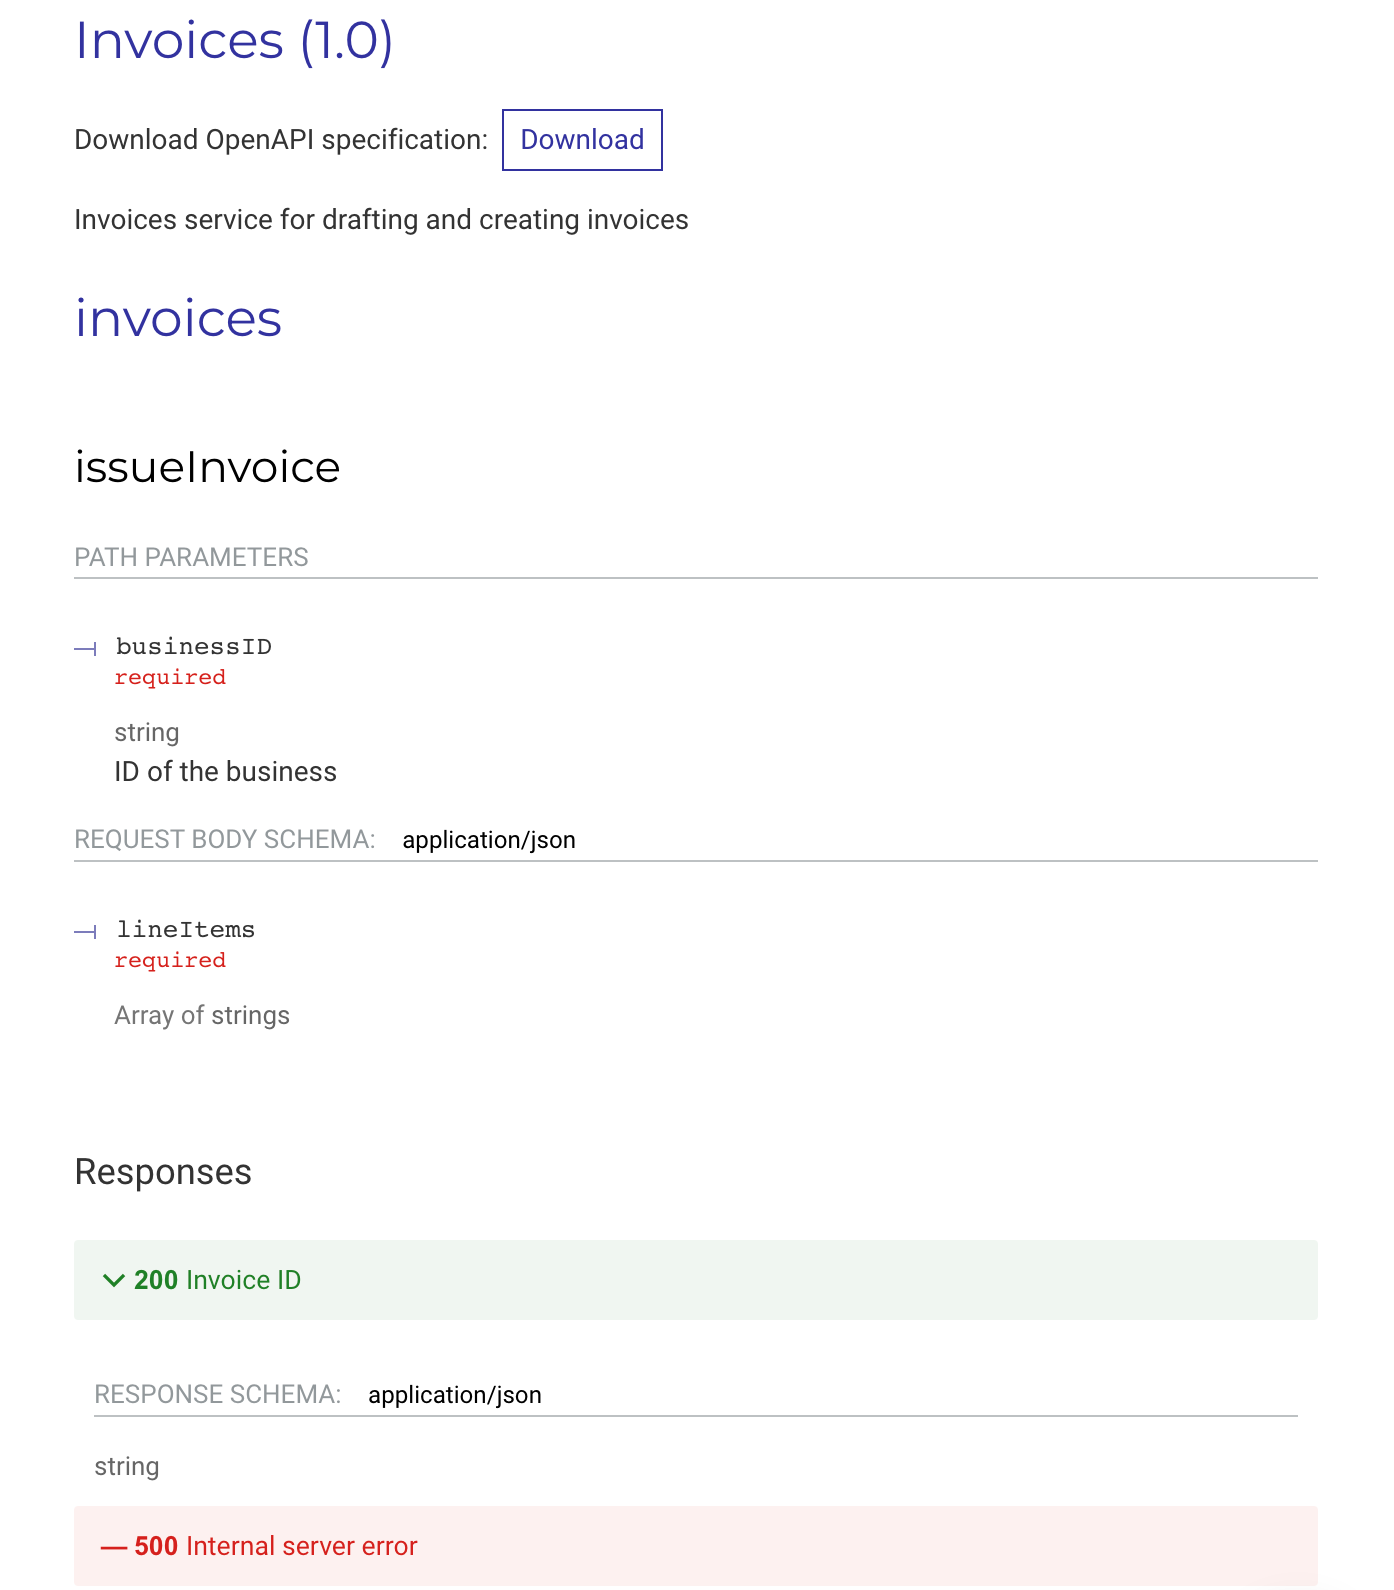 Screenshot of a page showing our invoices API, urls, parameters and
responses